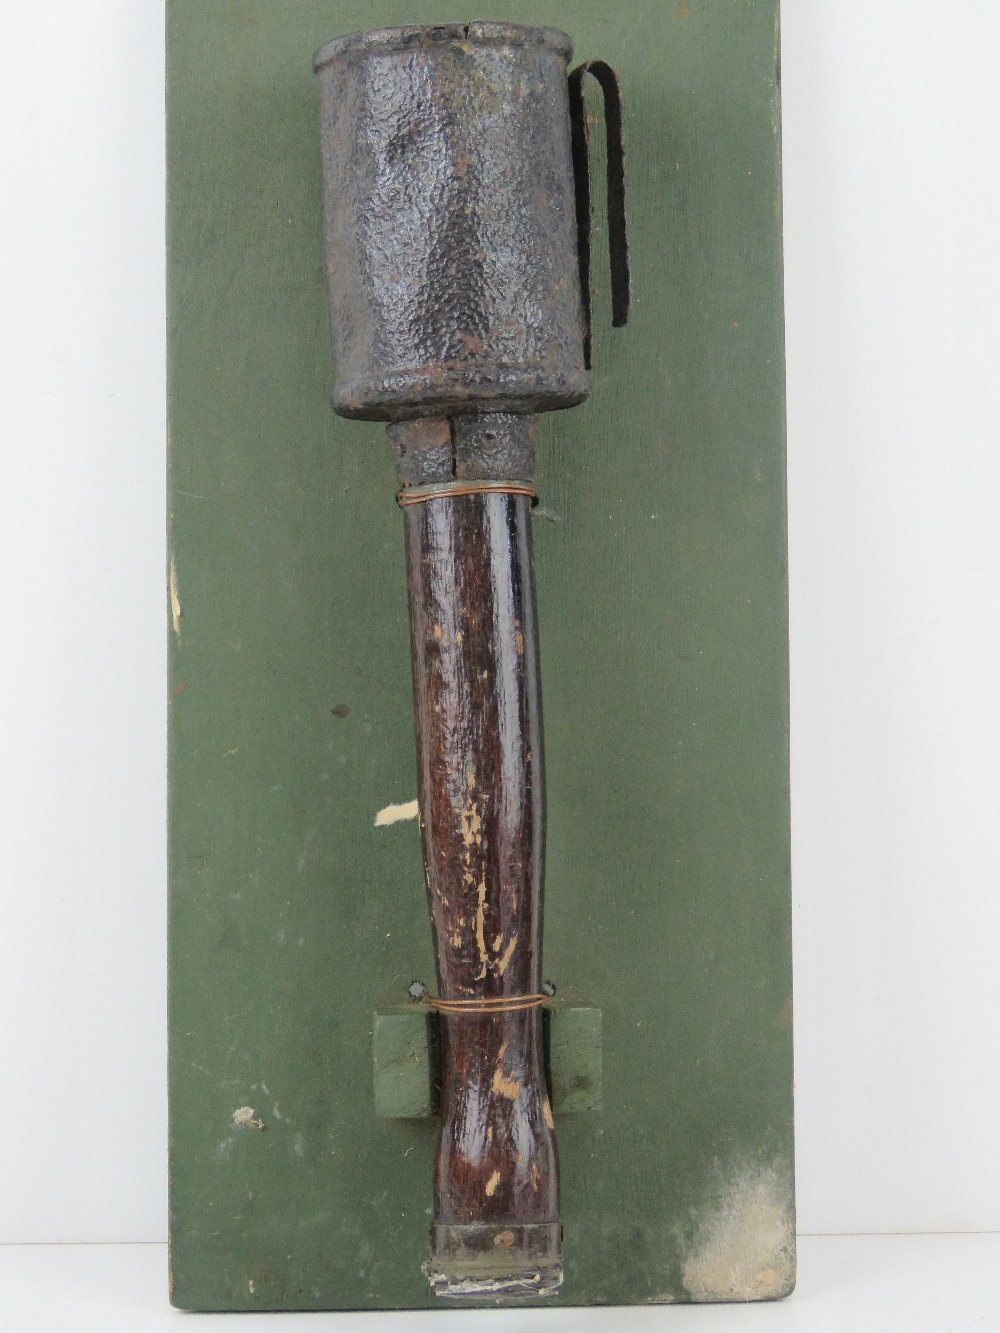 An inert WWI German stick grenade, mounted on board for display purposes, board measuring 42 x 18cm.